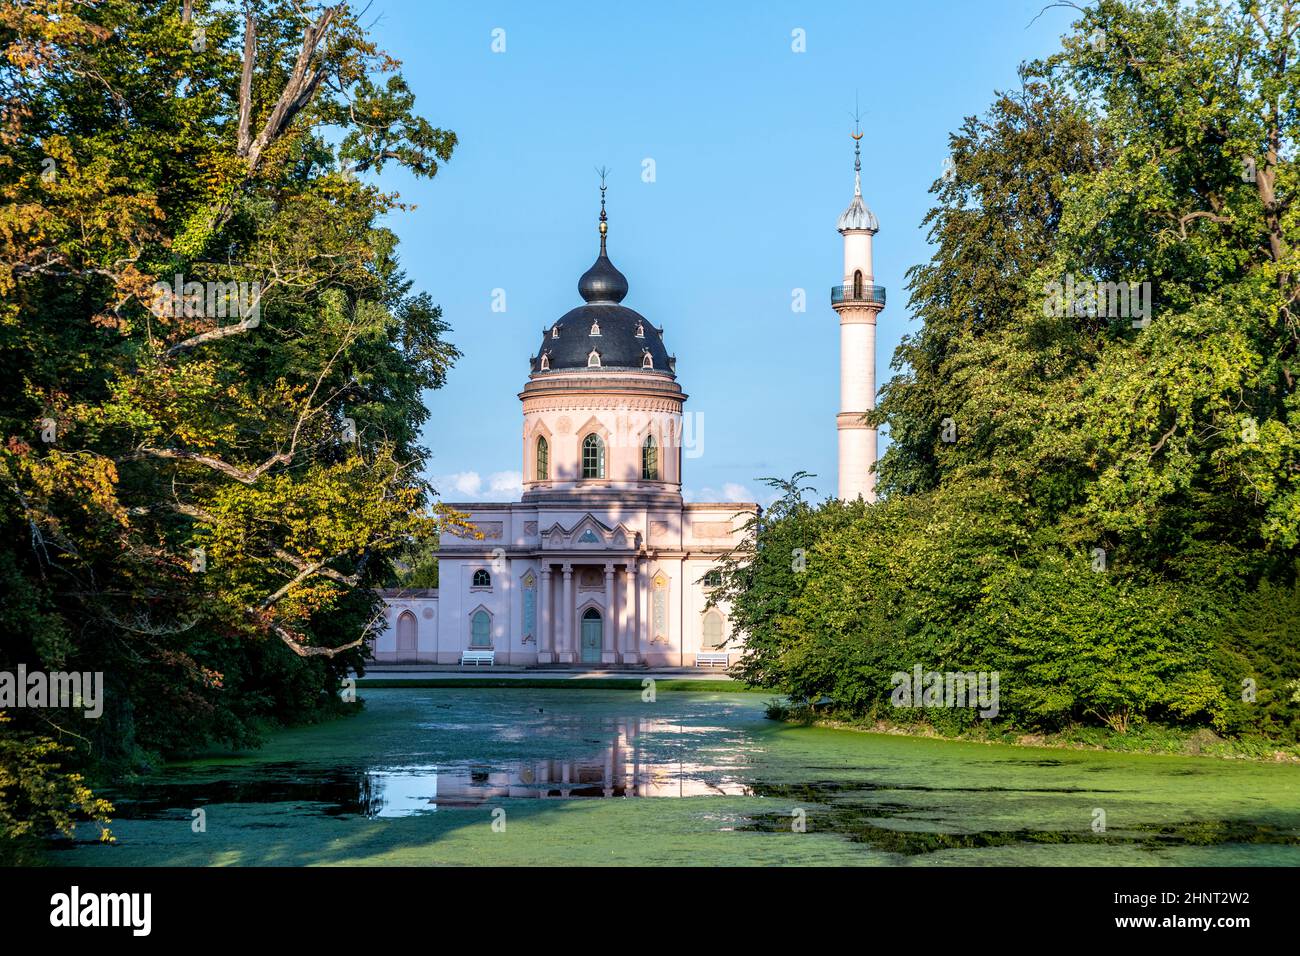 The famous mosque in the palace garden of Schwetzingen Stock Photo